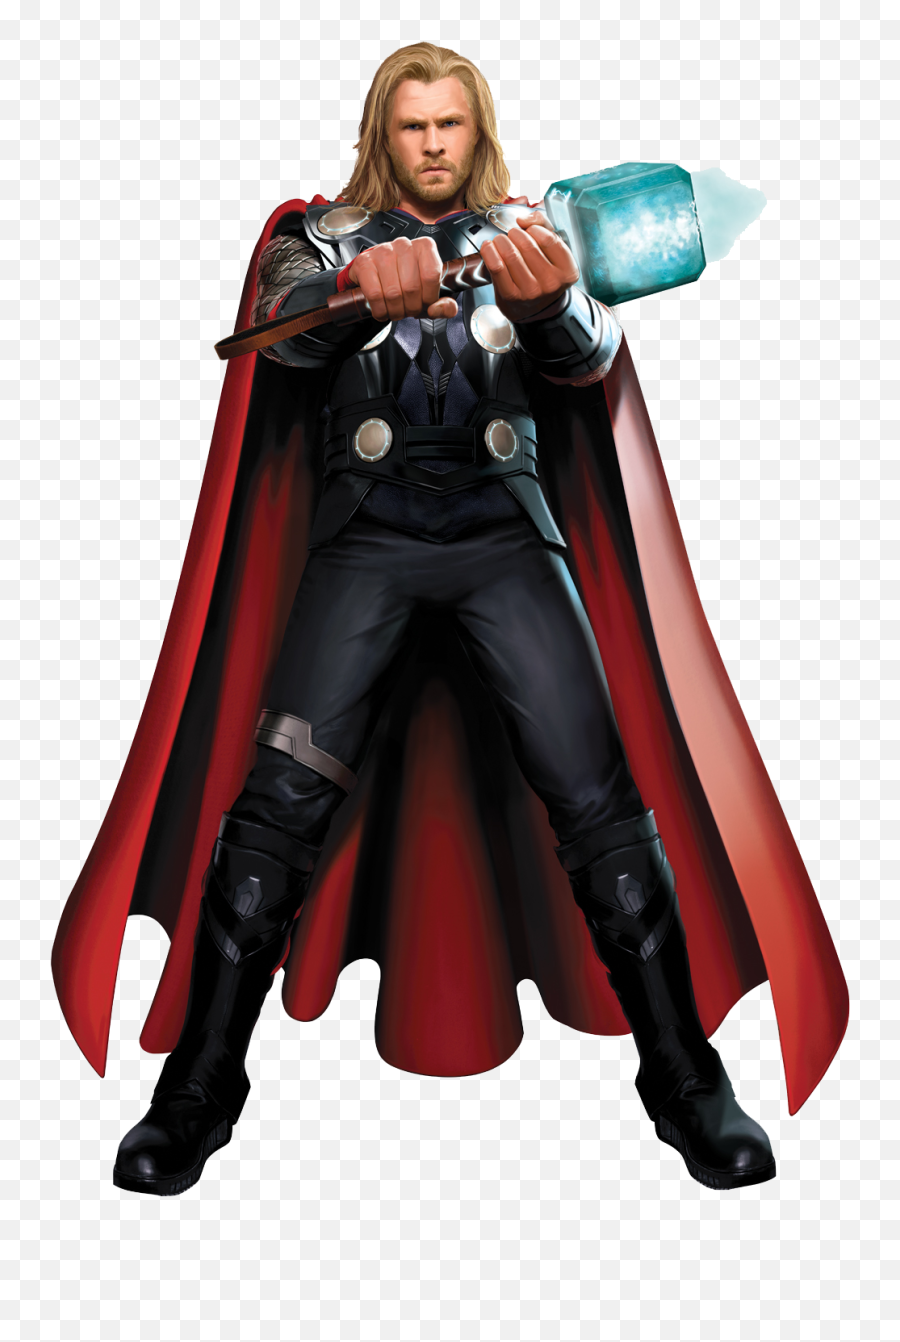 Download Thor Free Photo Images And Clipart Freeimg Png 2 - Thor Png Emoji,Thor Hammer Emoji